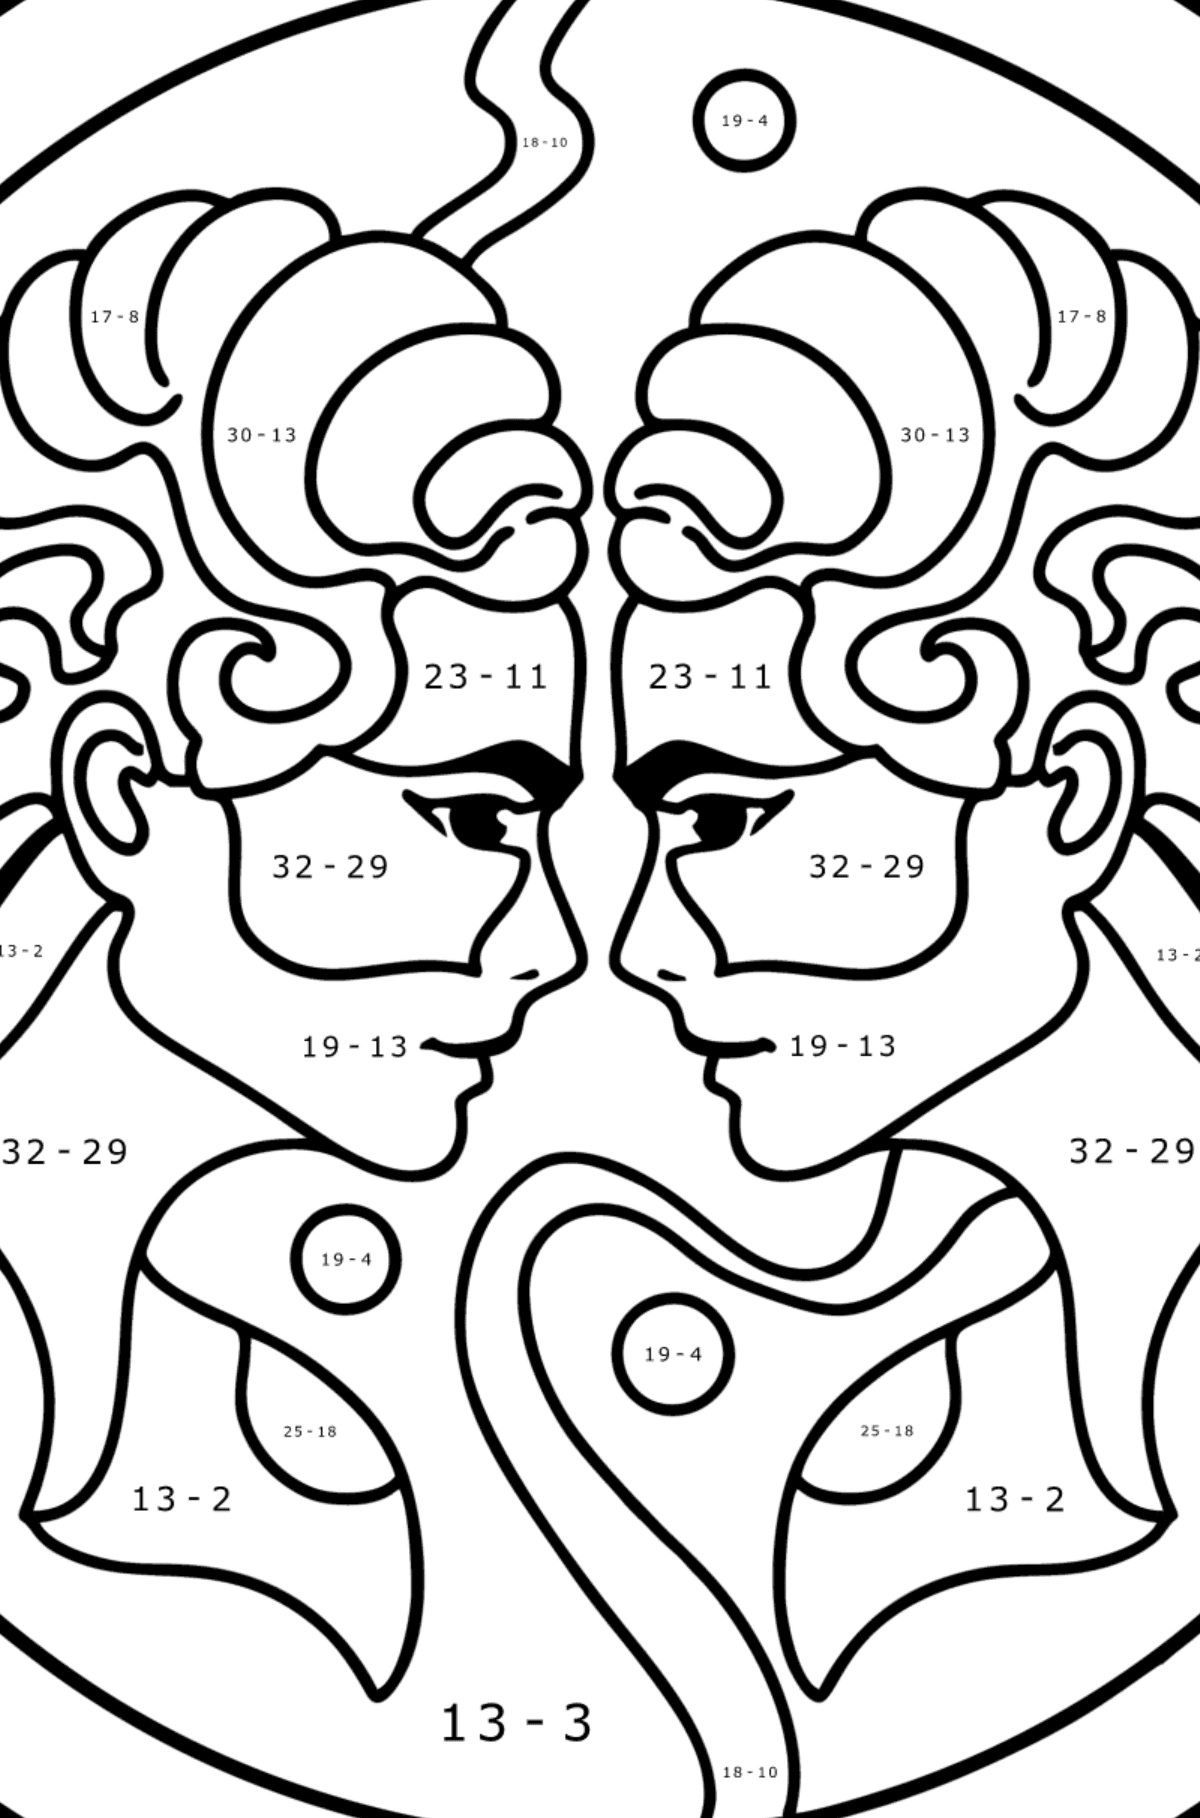 Coloring page for kids - Gemini zodiac sign - Math Coloring - Subtraction for Kids